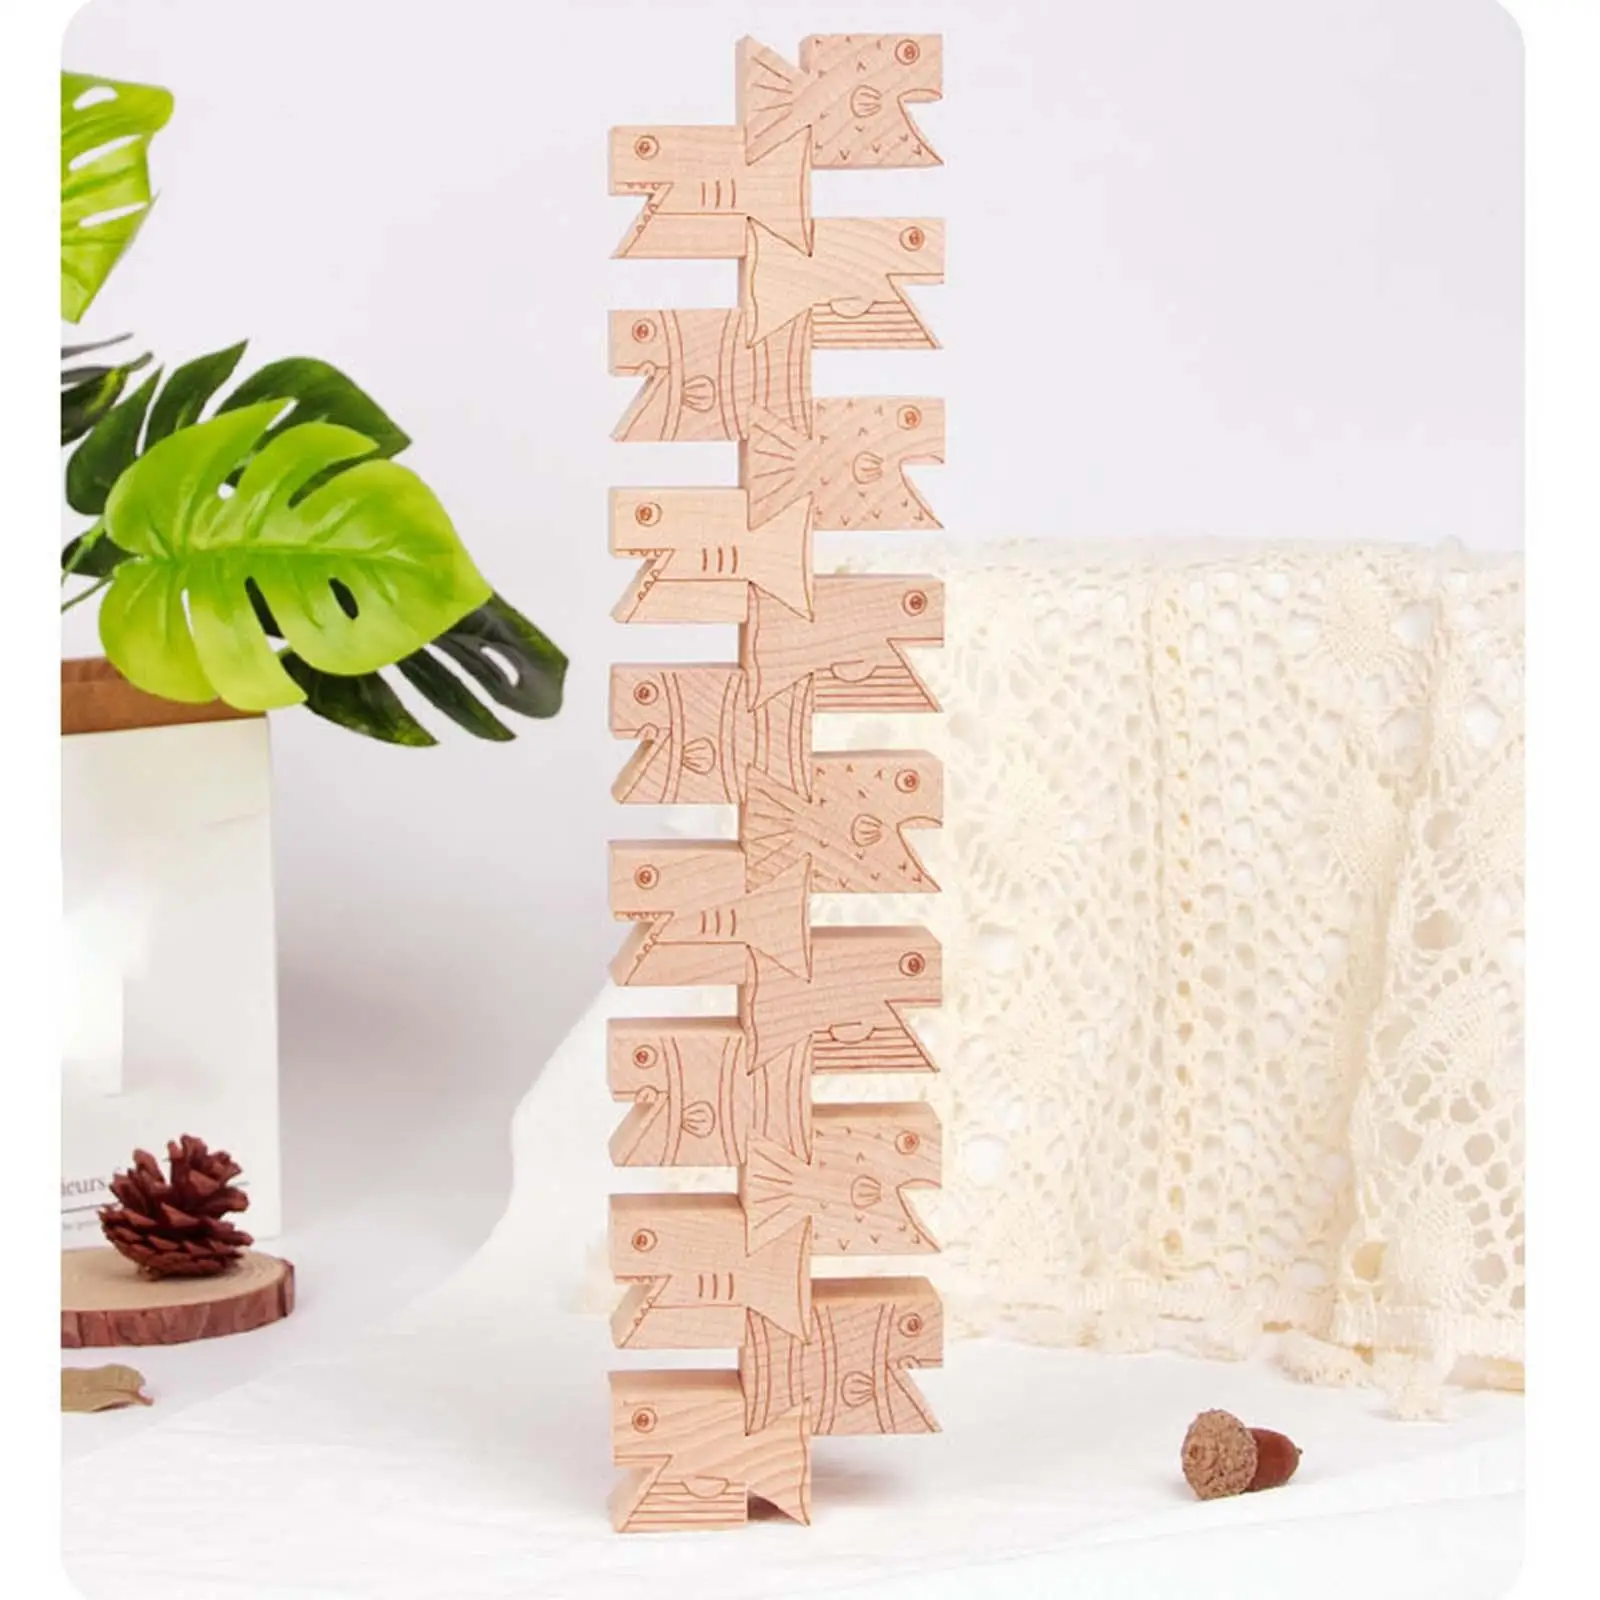 16Pcs Wooden Stacking Blocks Building Blocks for Kids Early Educational Toy